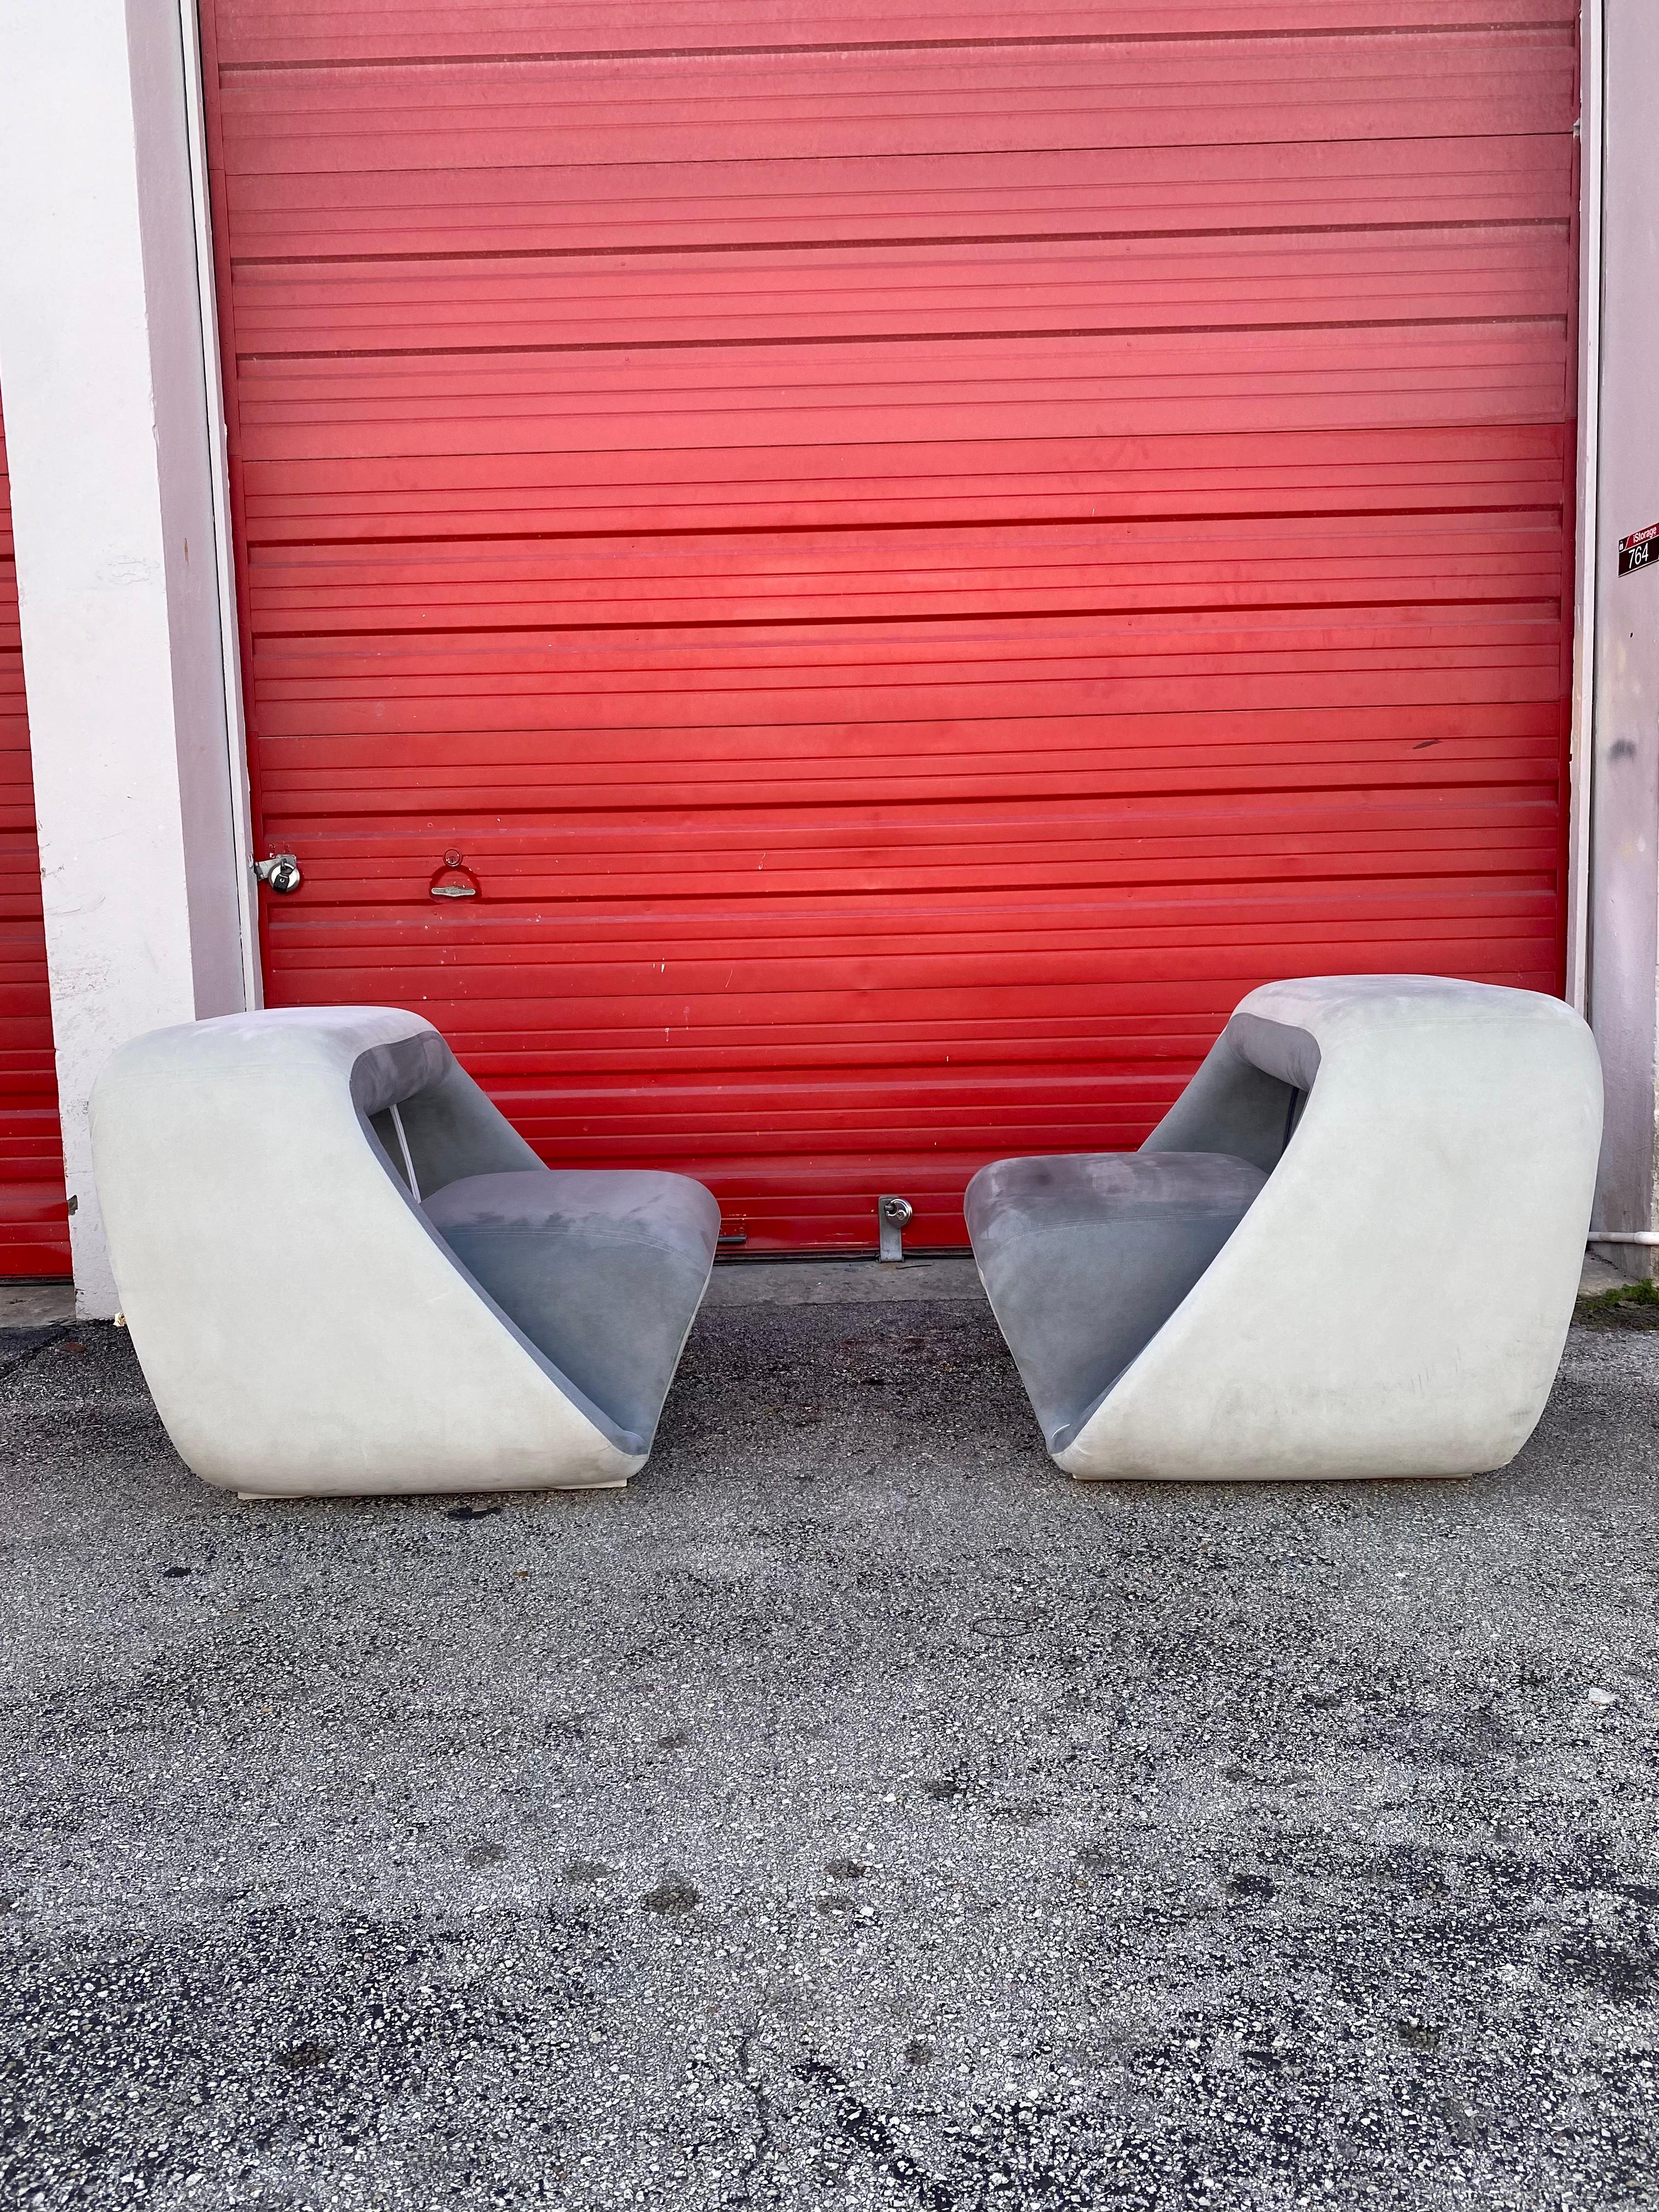 1970s Meritalia Sculptural Space Age Air Loungers Chairs, Set of 2 In Good Condition For Sale In Fort Lauderdale, FL